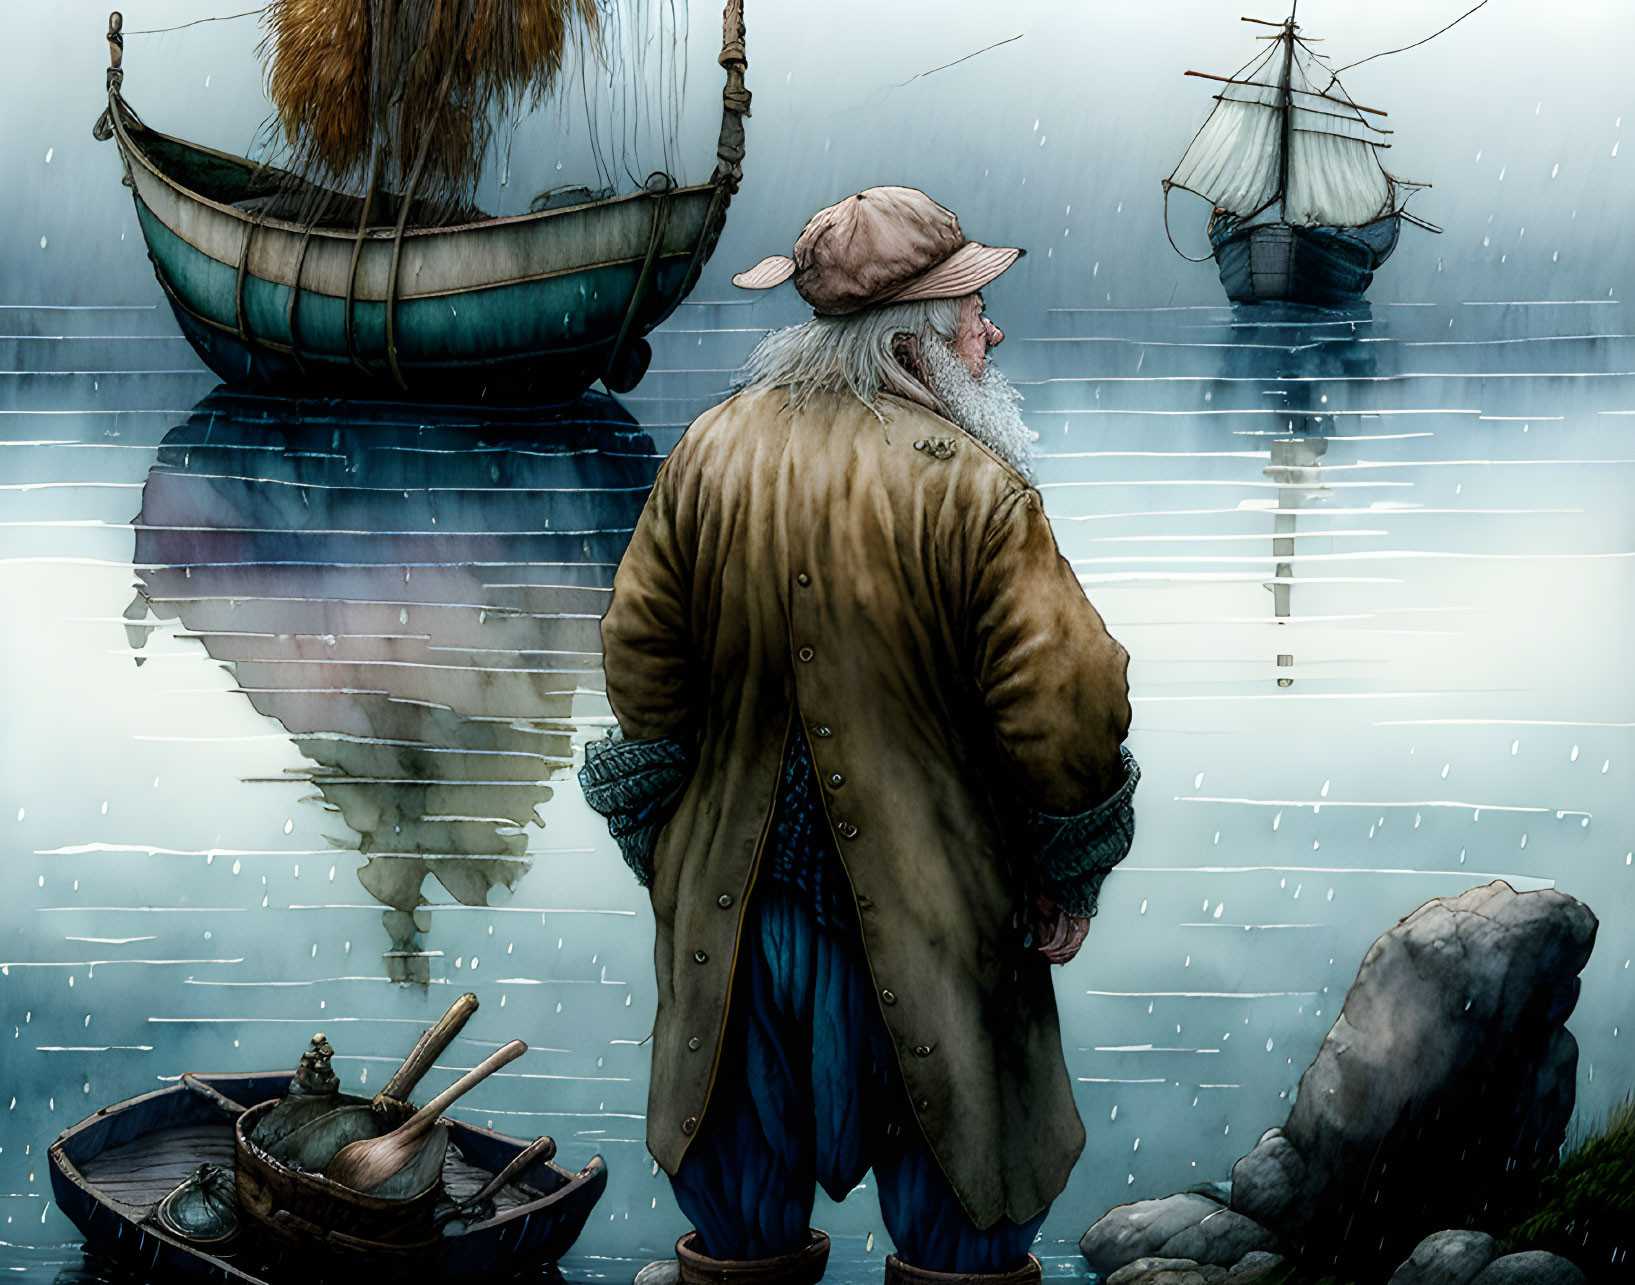 Weathered sailor in coat gazes at ghostly ships in misty sea scene.